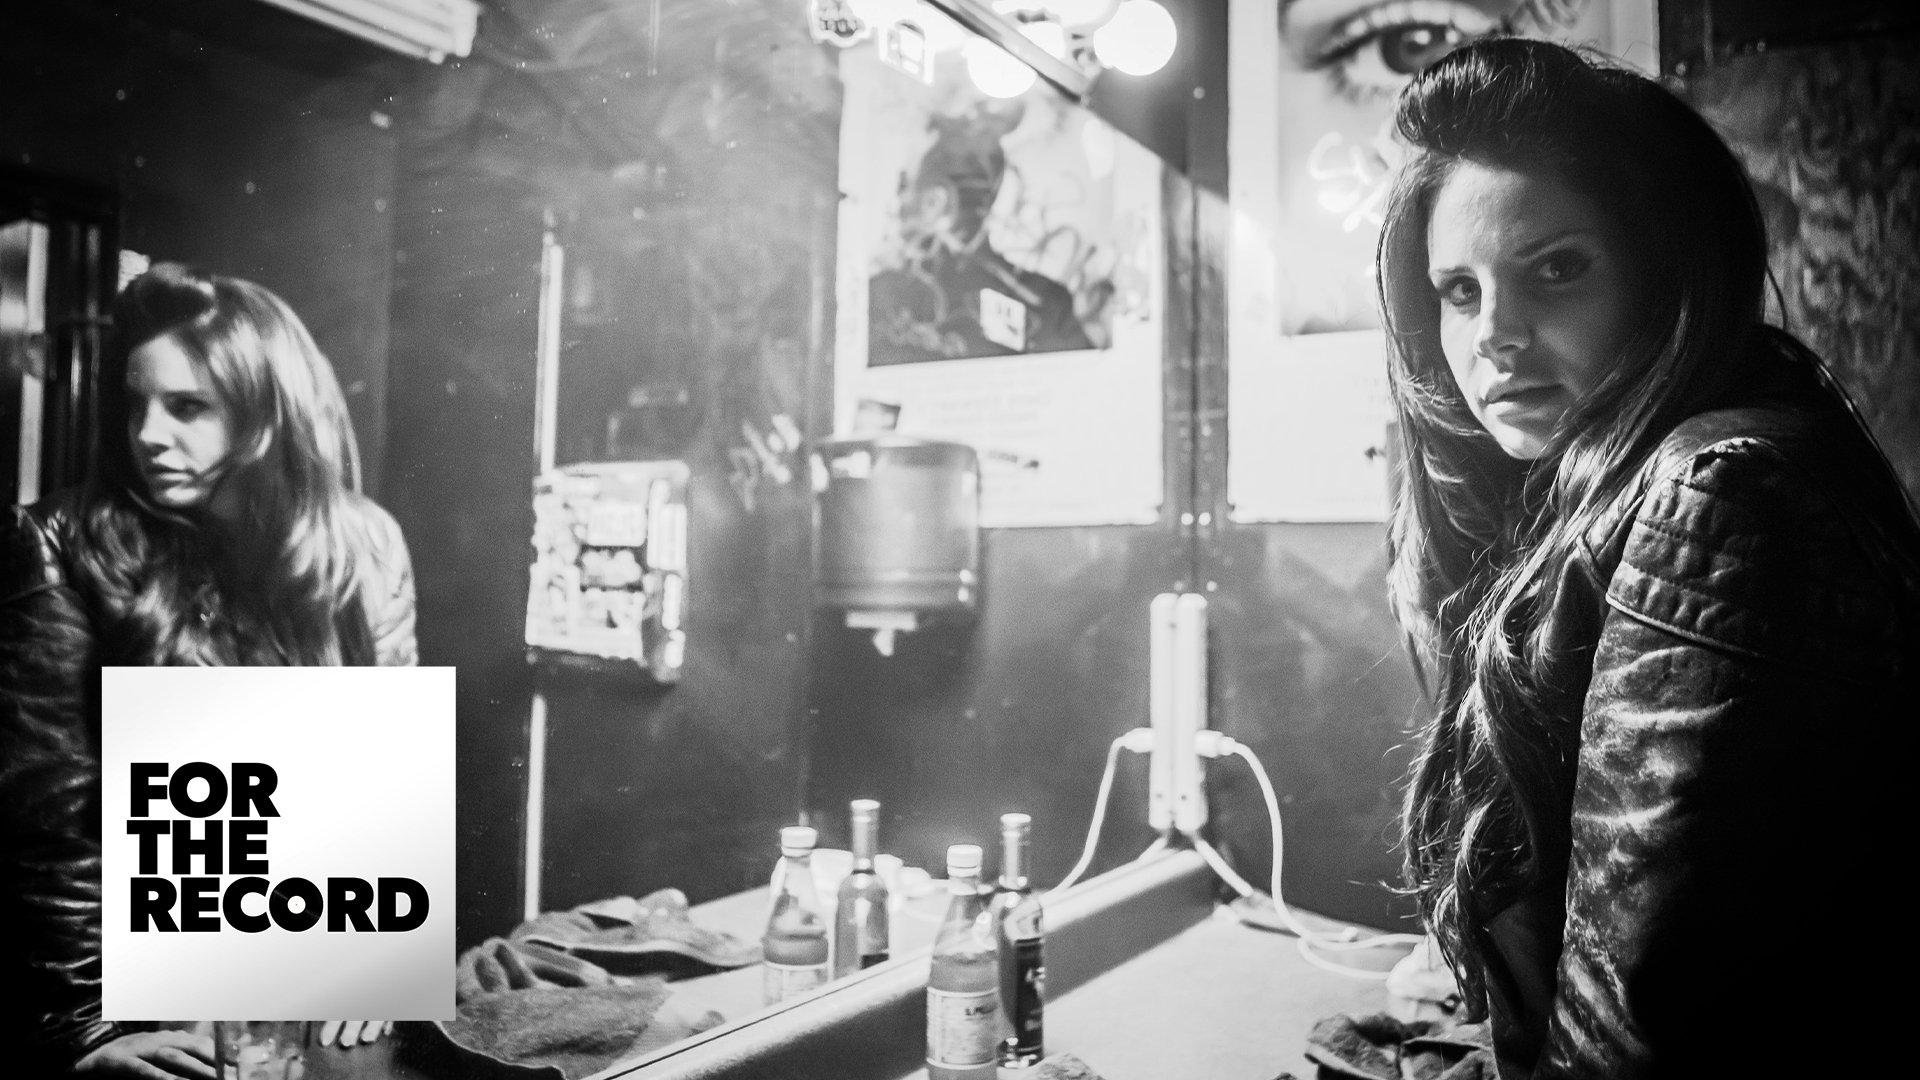 The career and history of Lana del Rey: A time line - Music Data Blog